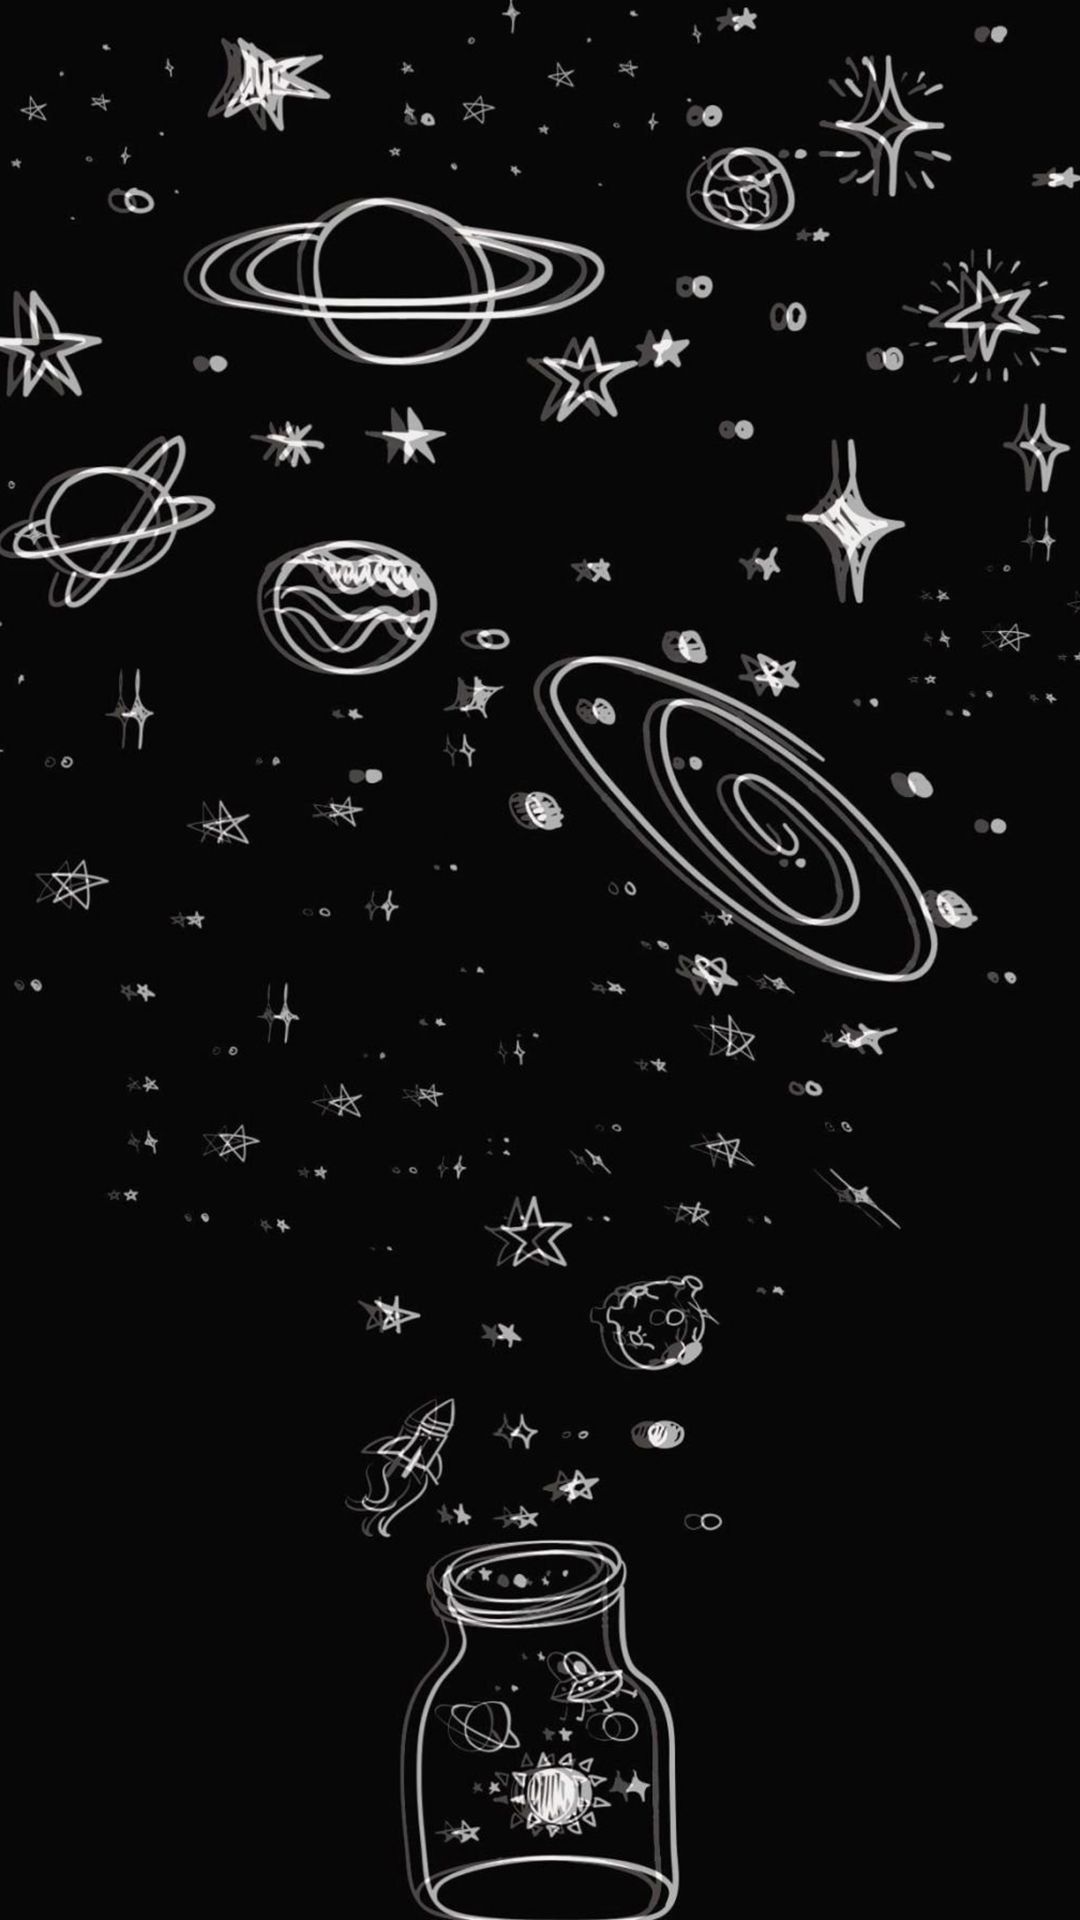 Black aesthetic wallpaper for phone with stars, planets, and a jar - Black glitch, black phone, beautiful, doodles, space